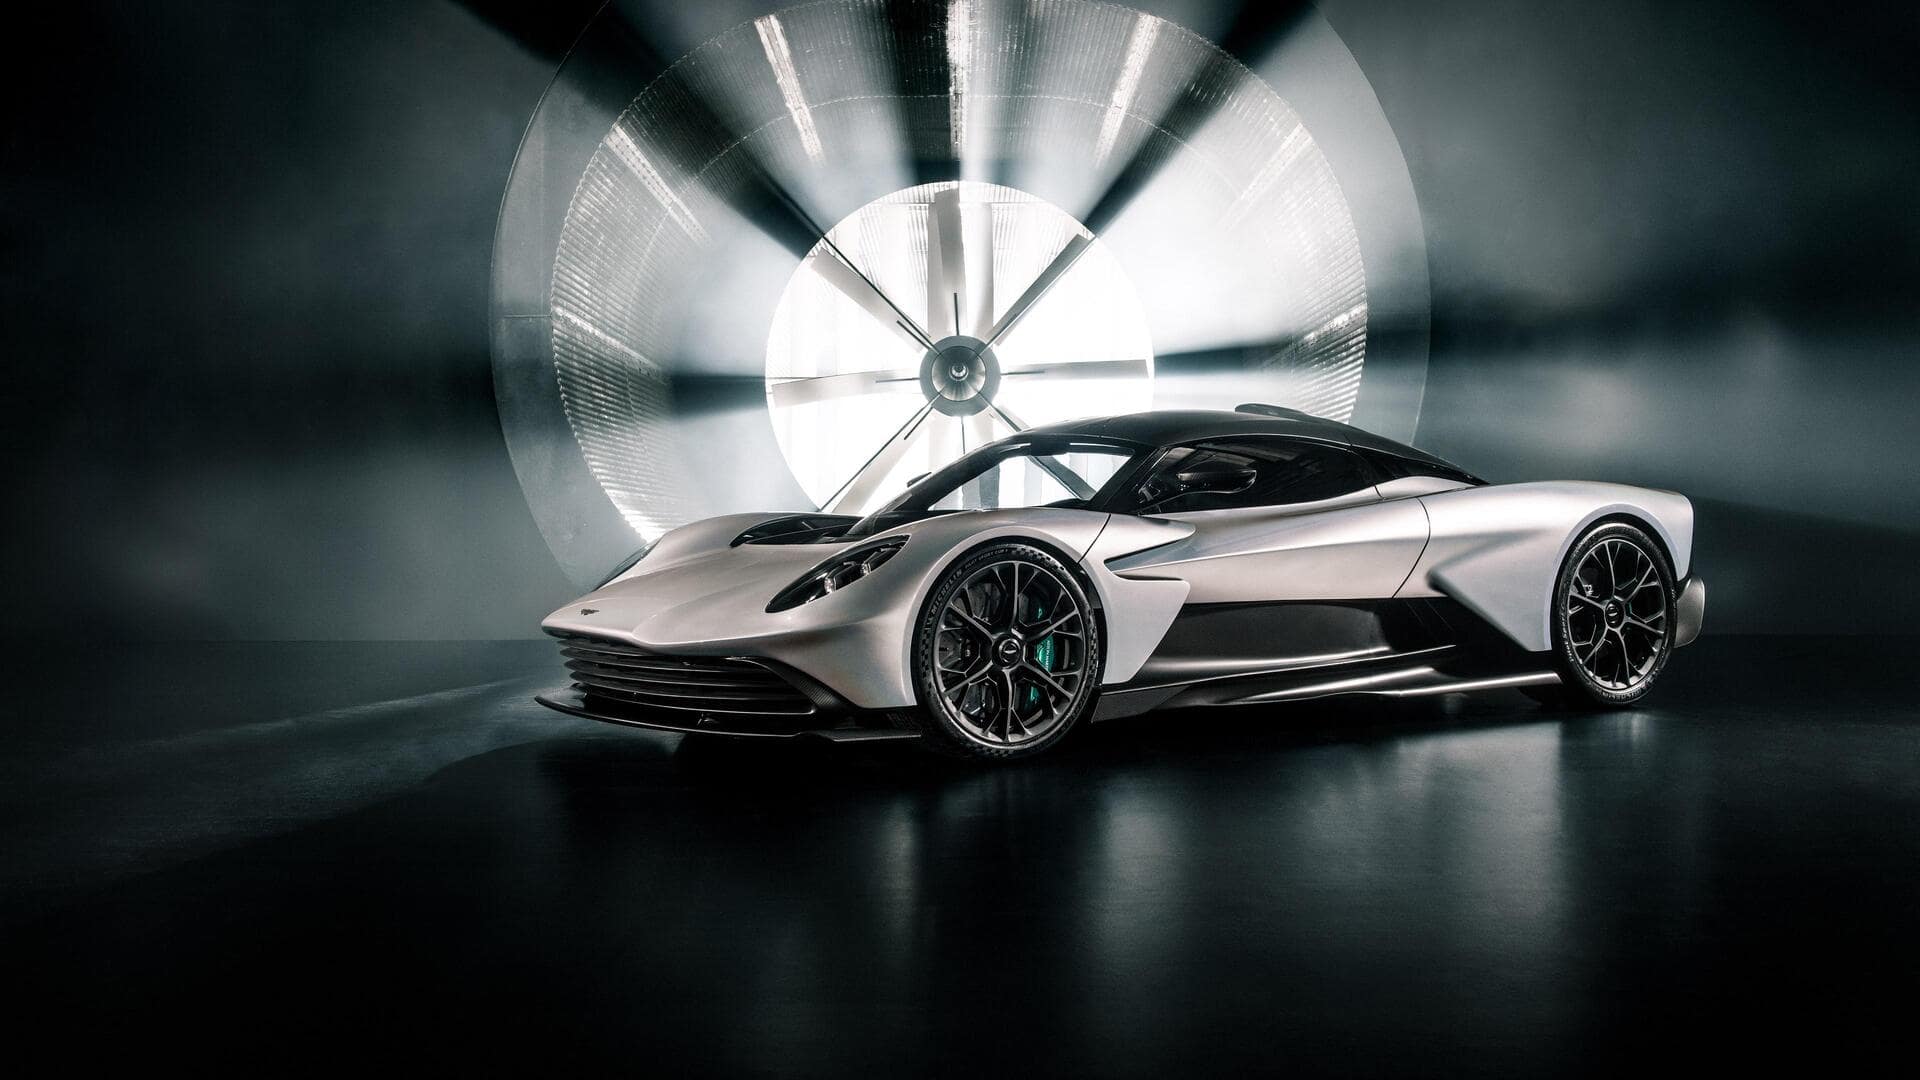 Aston Martin delays its first EV to 2026: Here's why